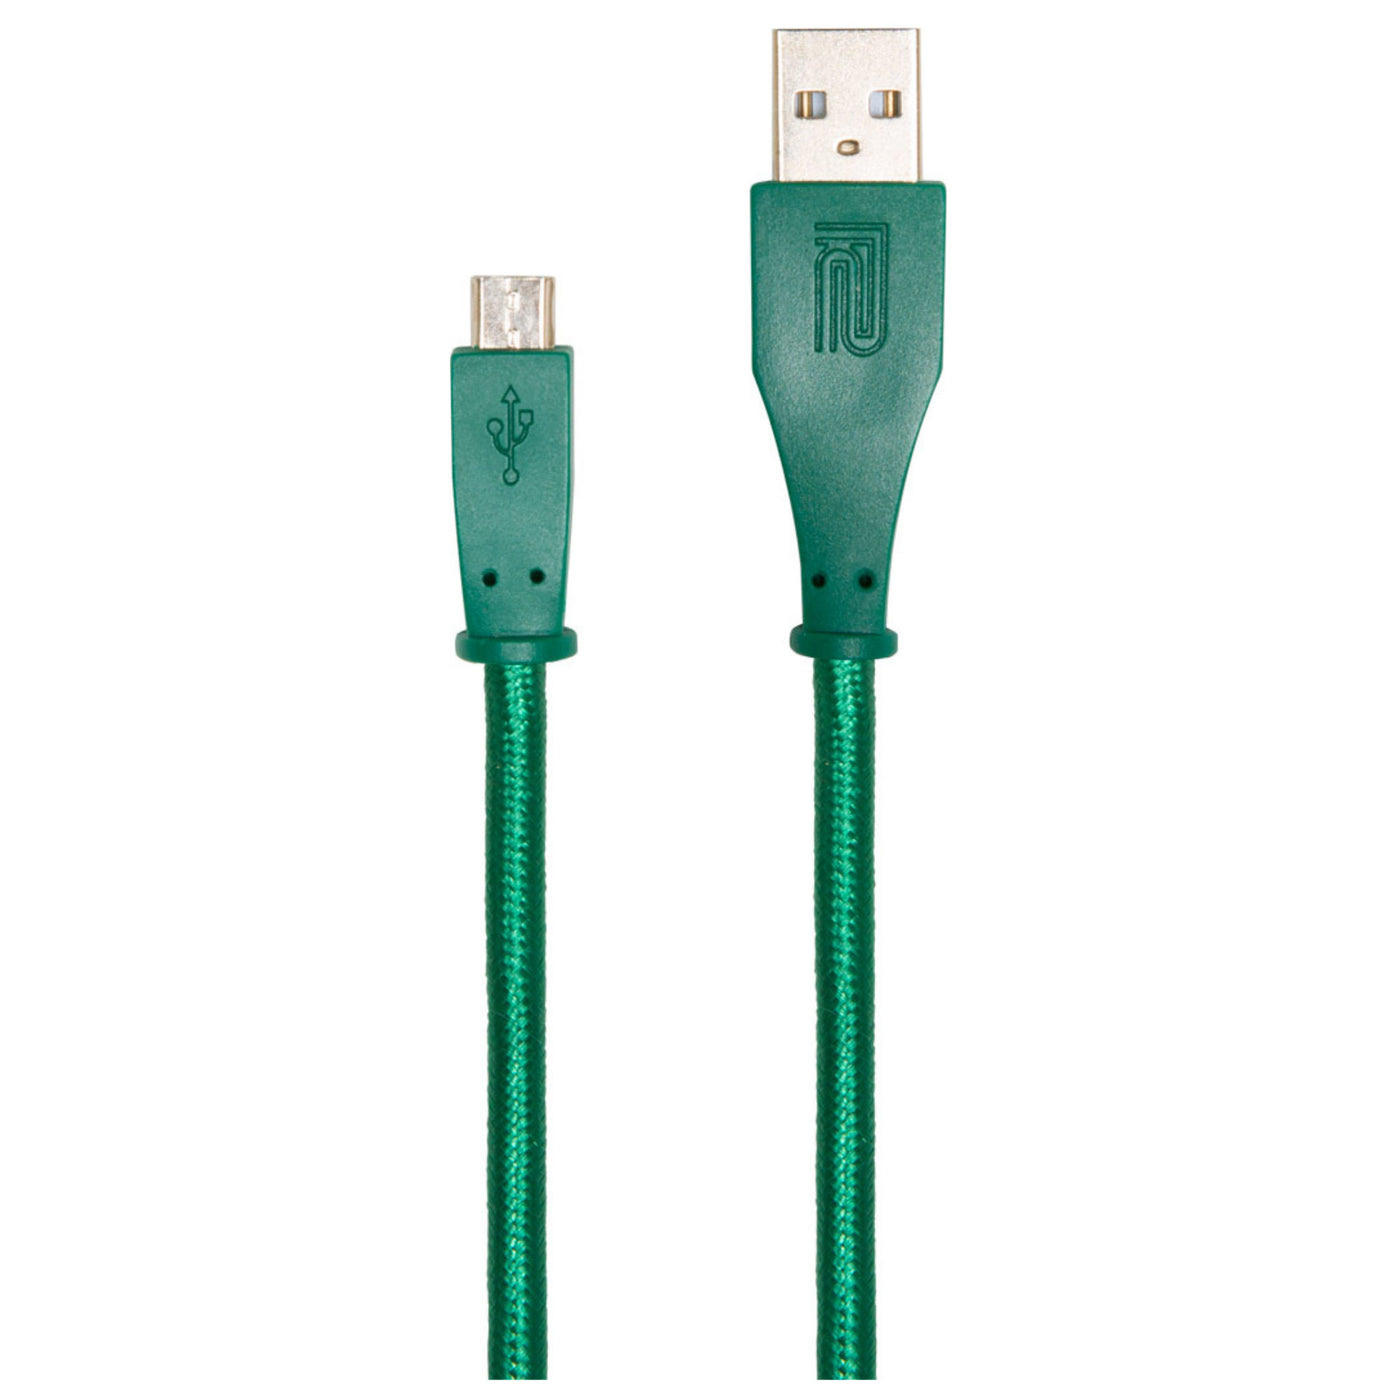 Roland RCC-10-UAUM 10' Interconnect Cable, USB-A to Micro-USB - Green Woven